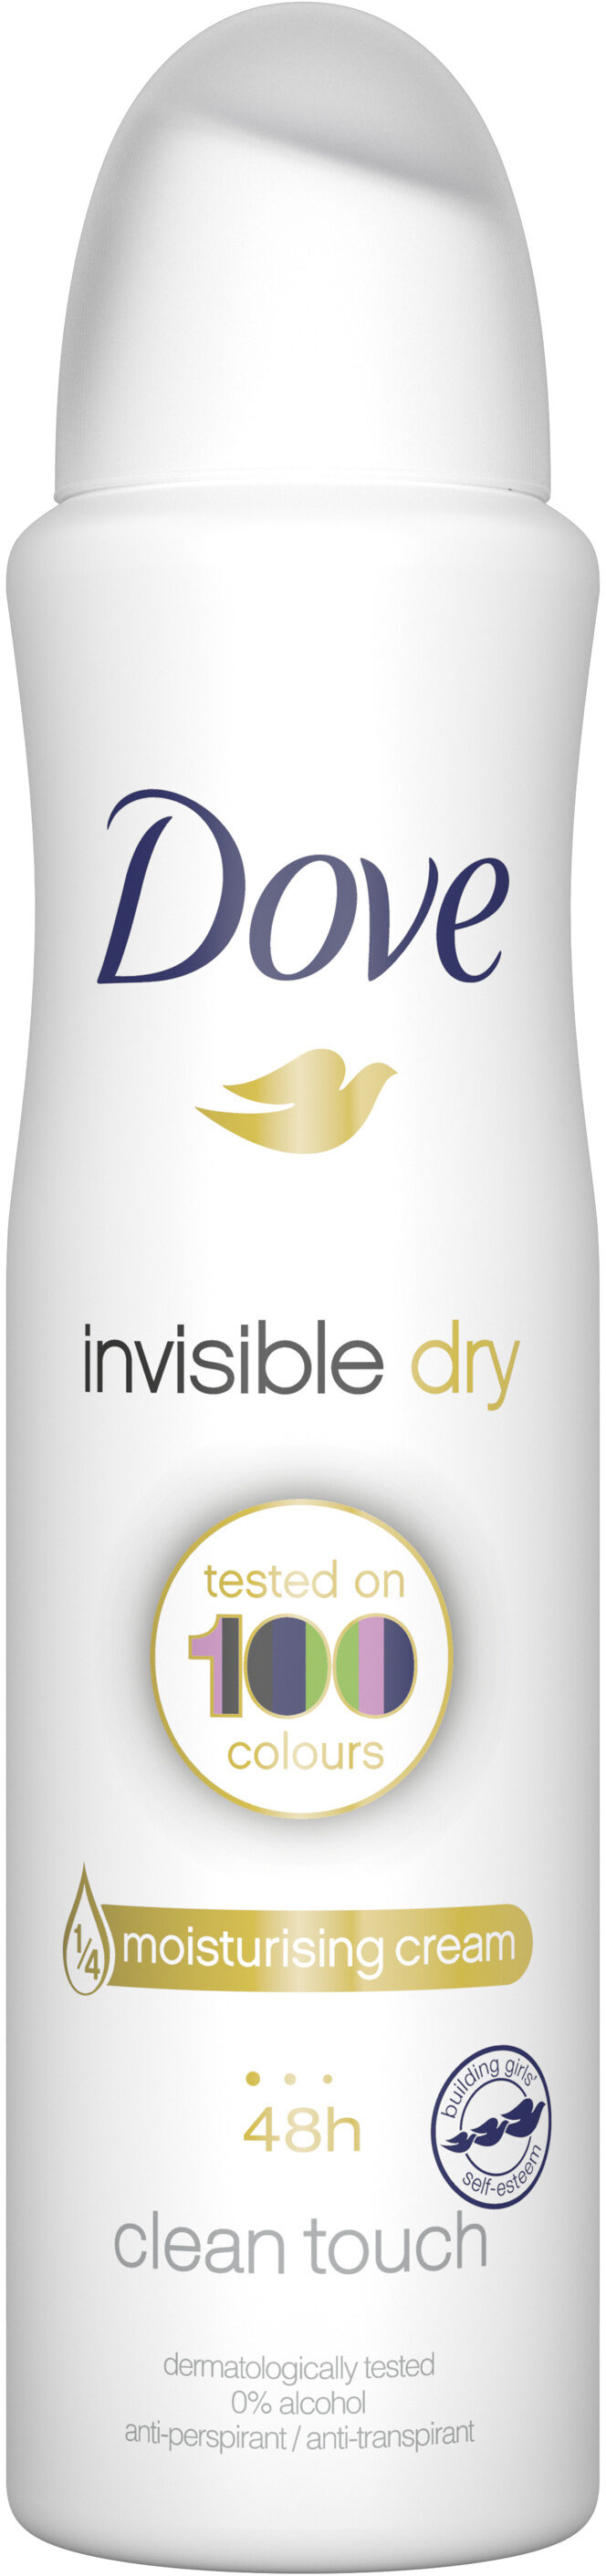 Dove Déodorant Femme Spray Anti Transpirant Invisible Dry - Product - fr